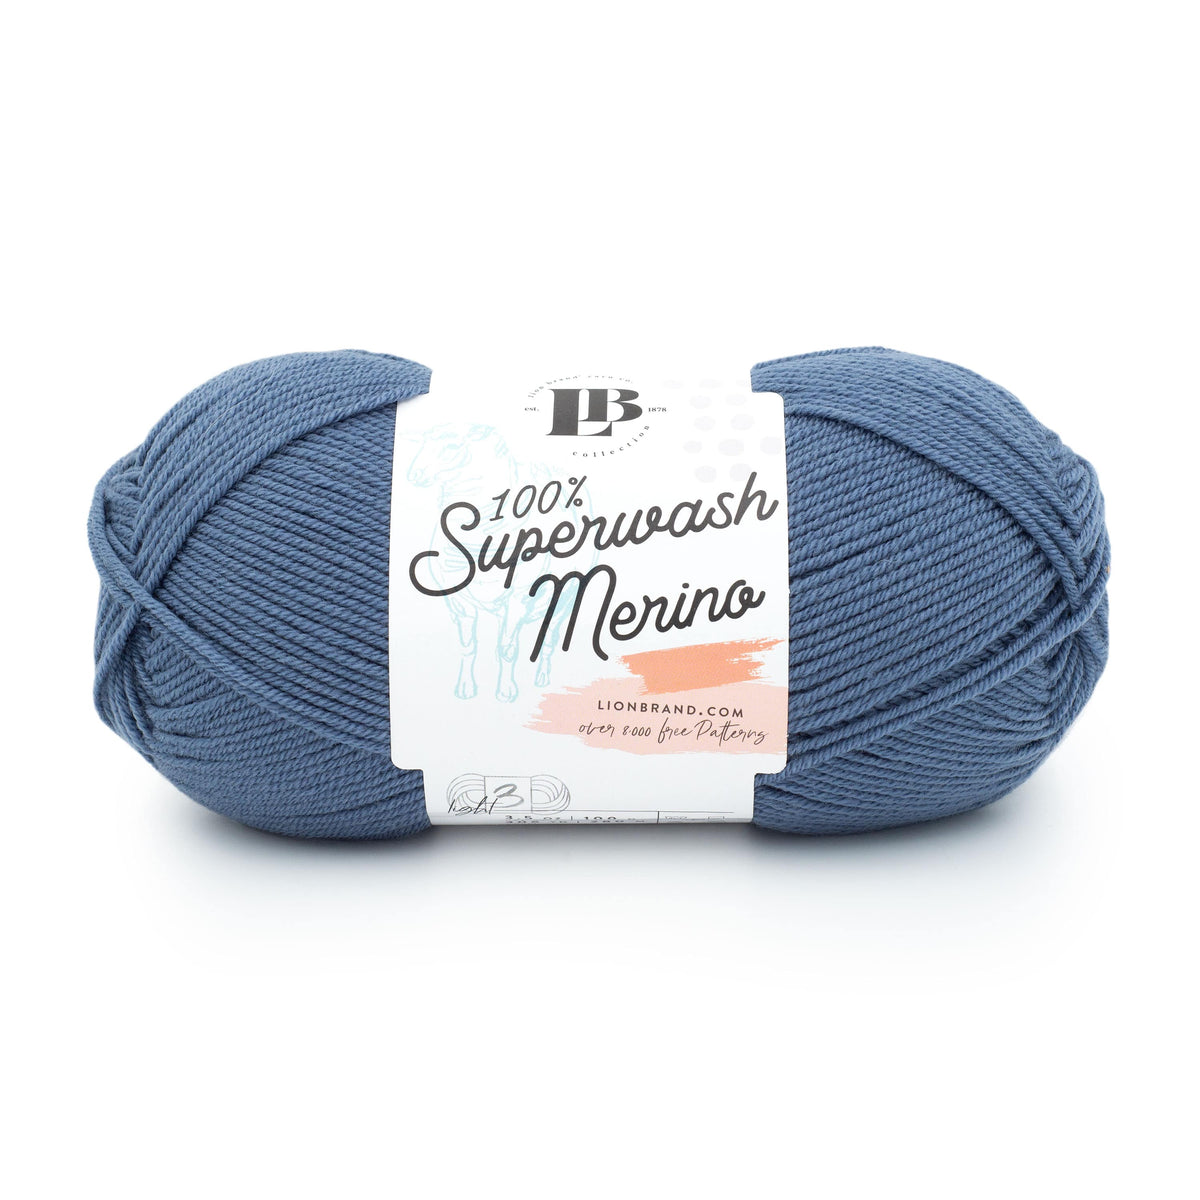 Be active and fit Keep active and fit: Scarfie Yarn Lion Brand Yarn